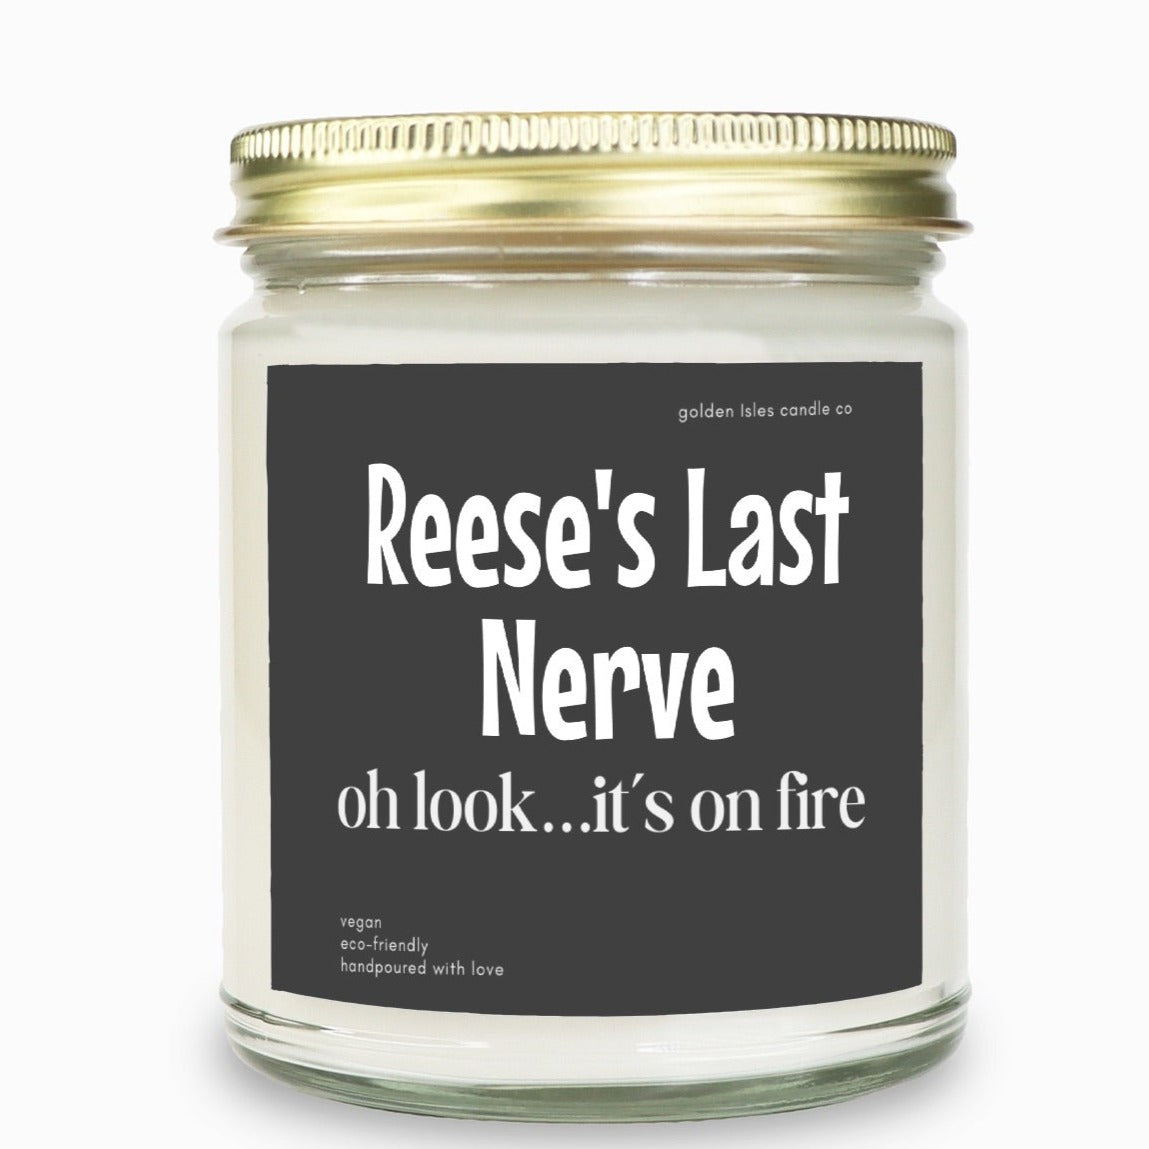 reeese's last nerve - oh look it's on fire